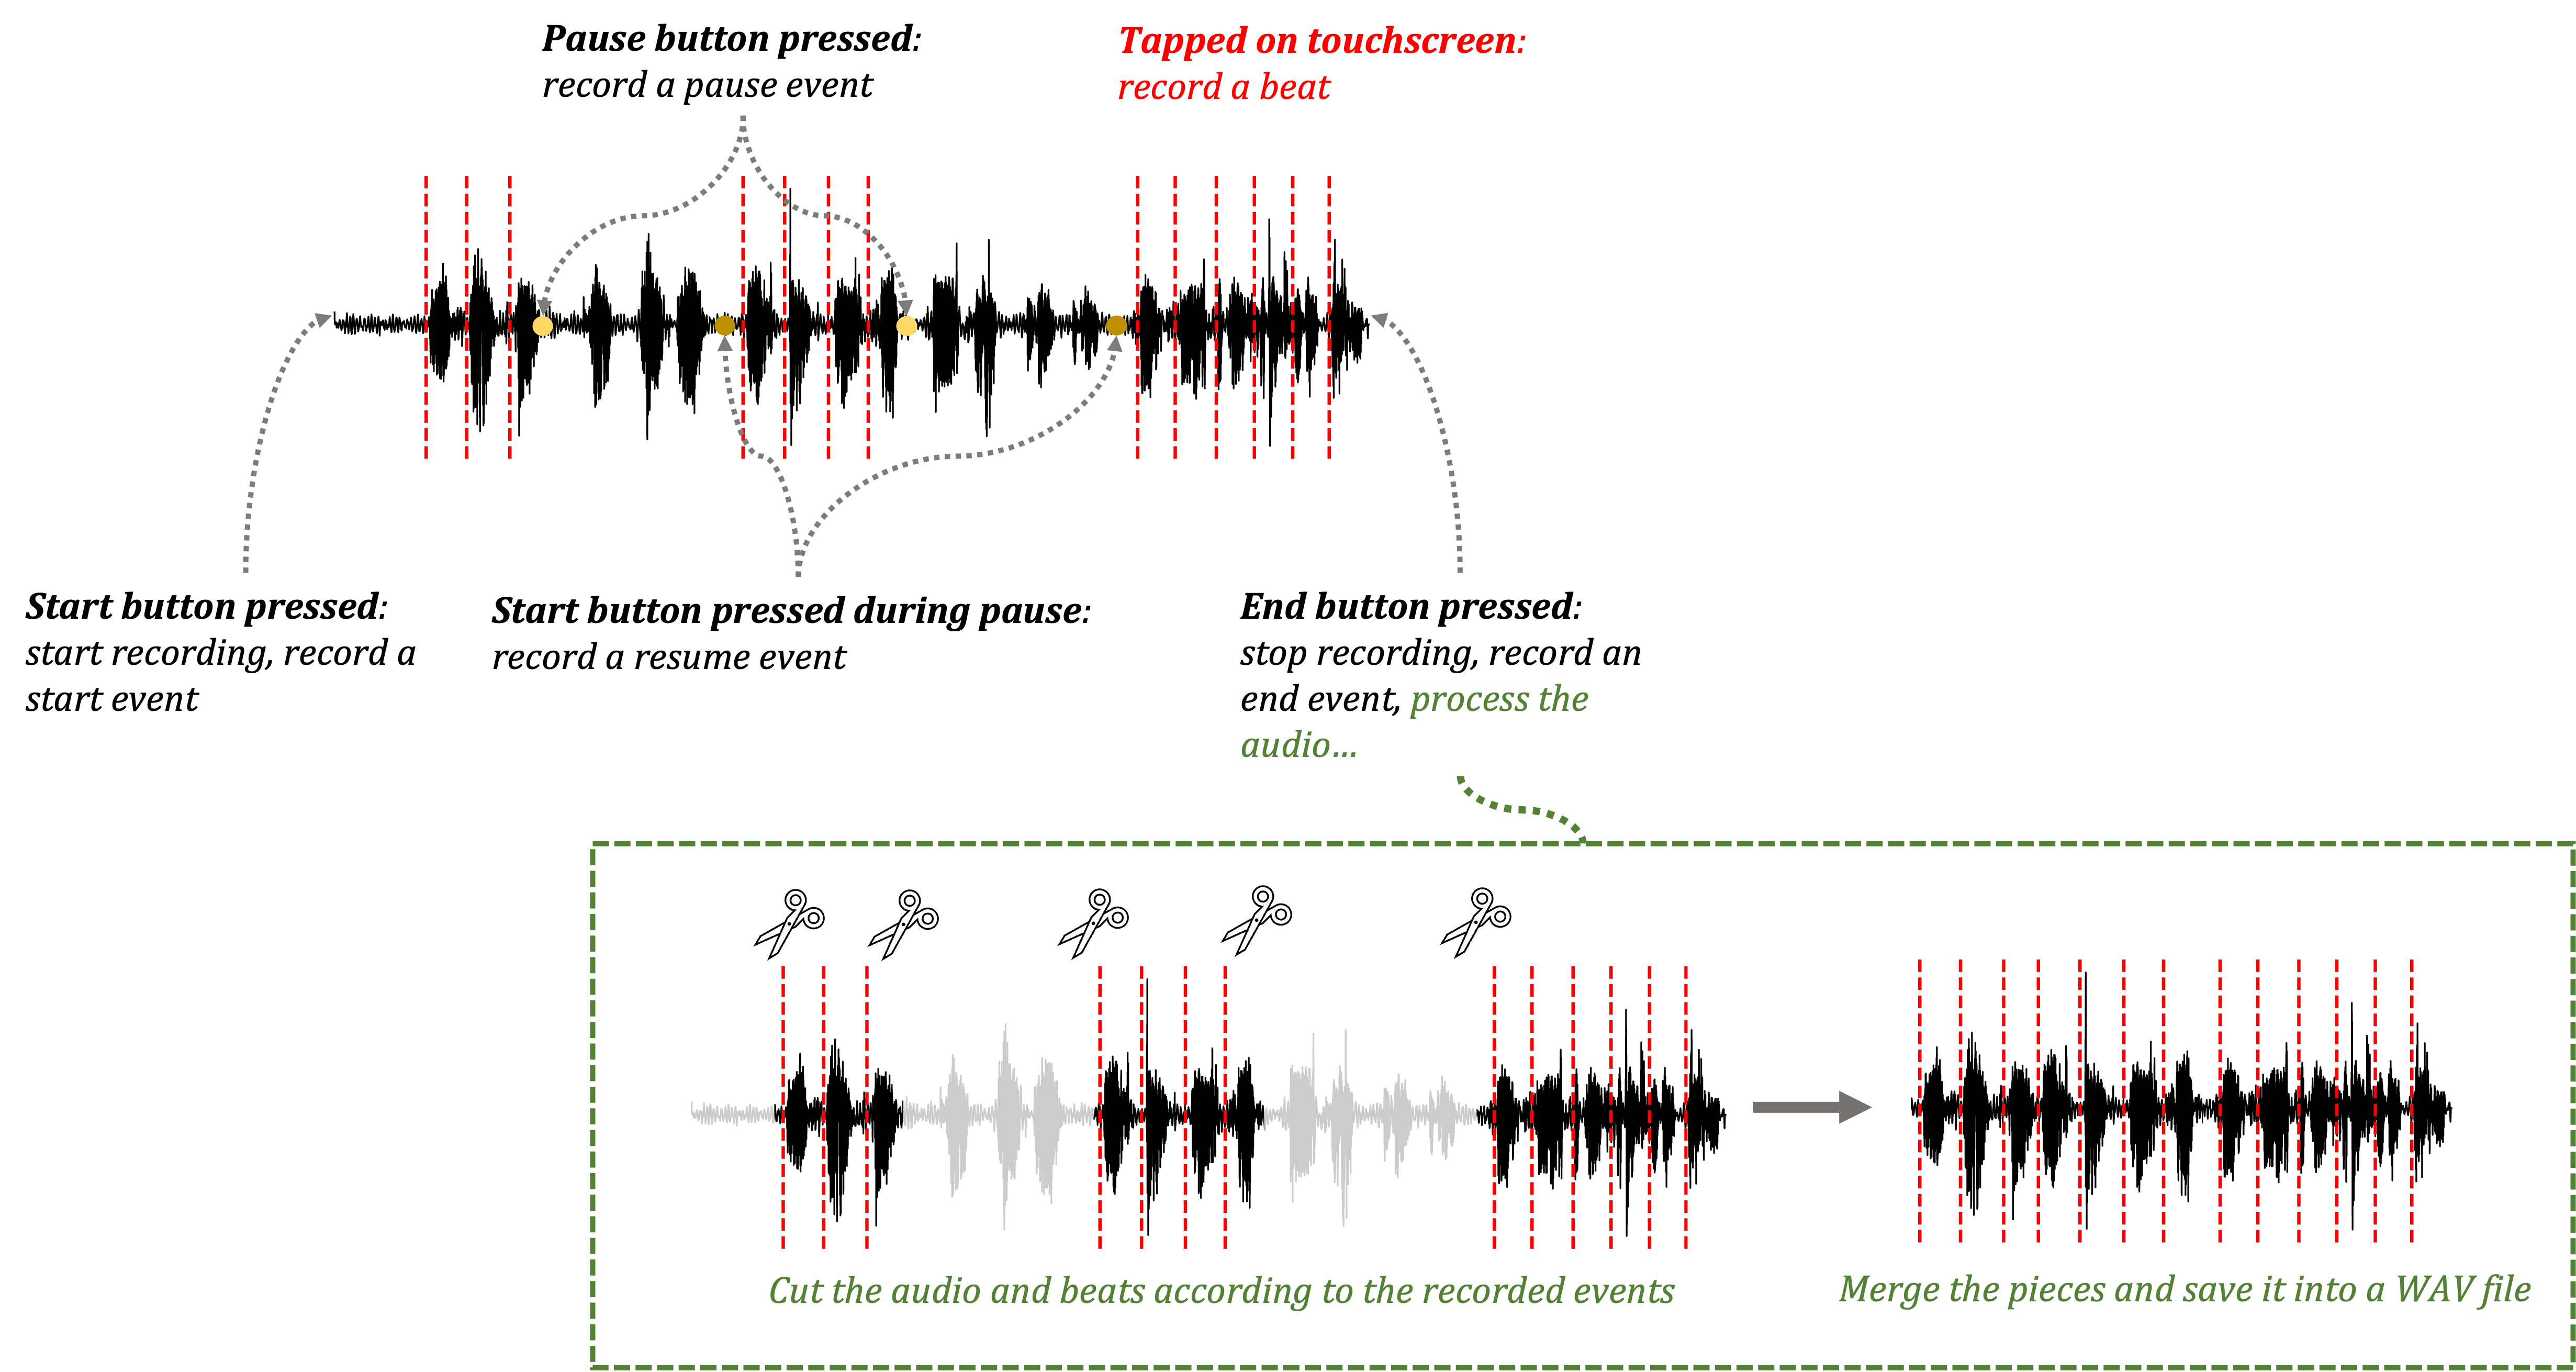 An explanation for the mechanism of recording